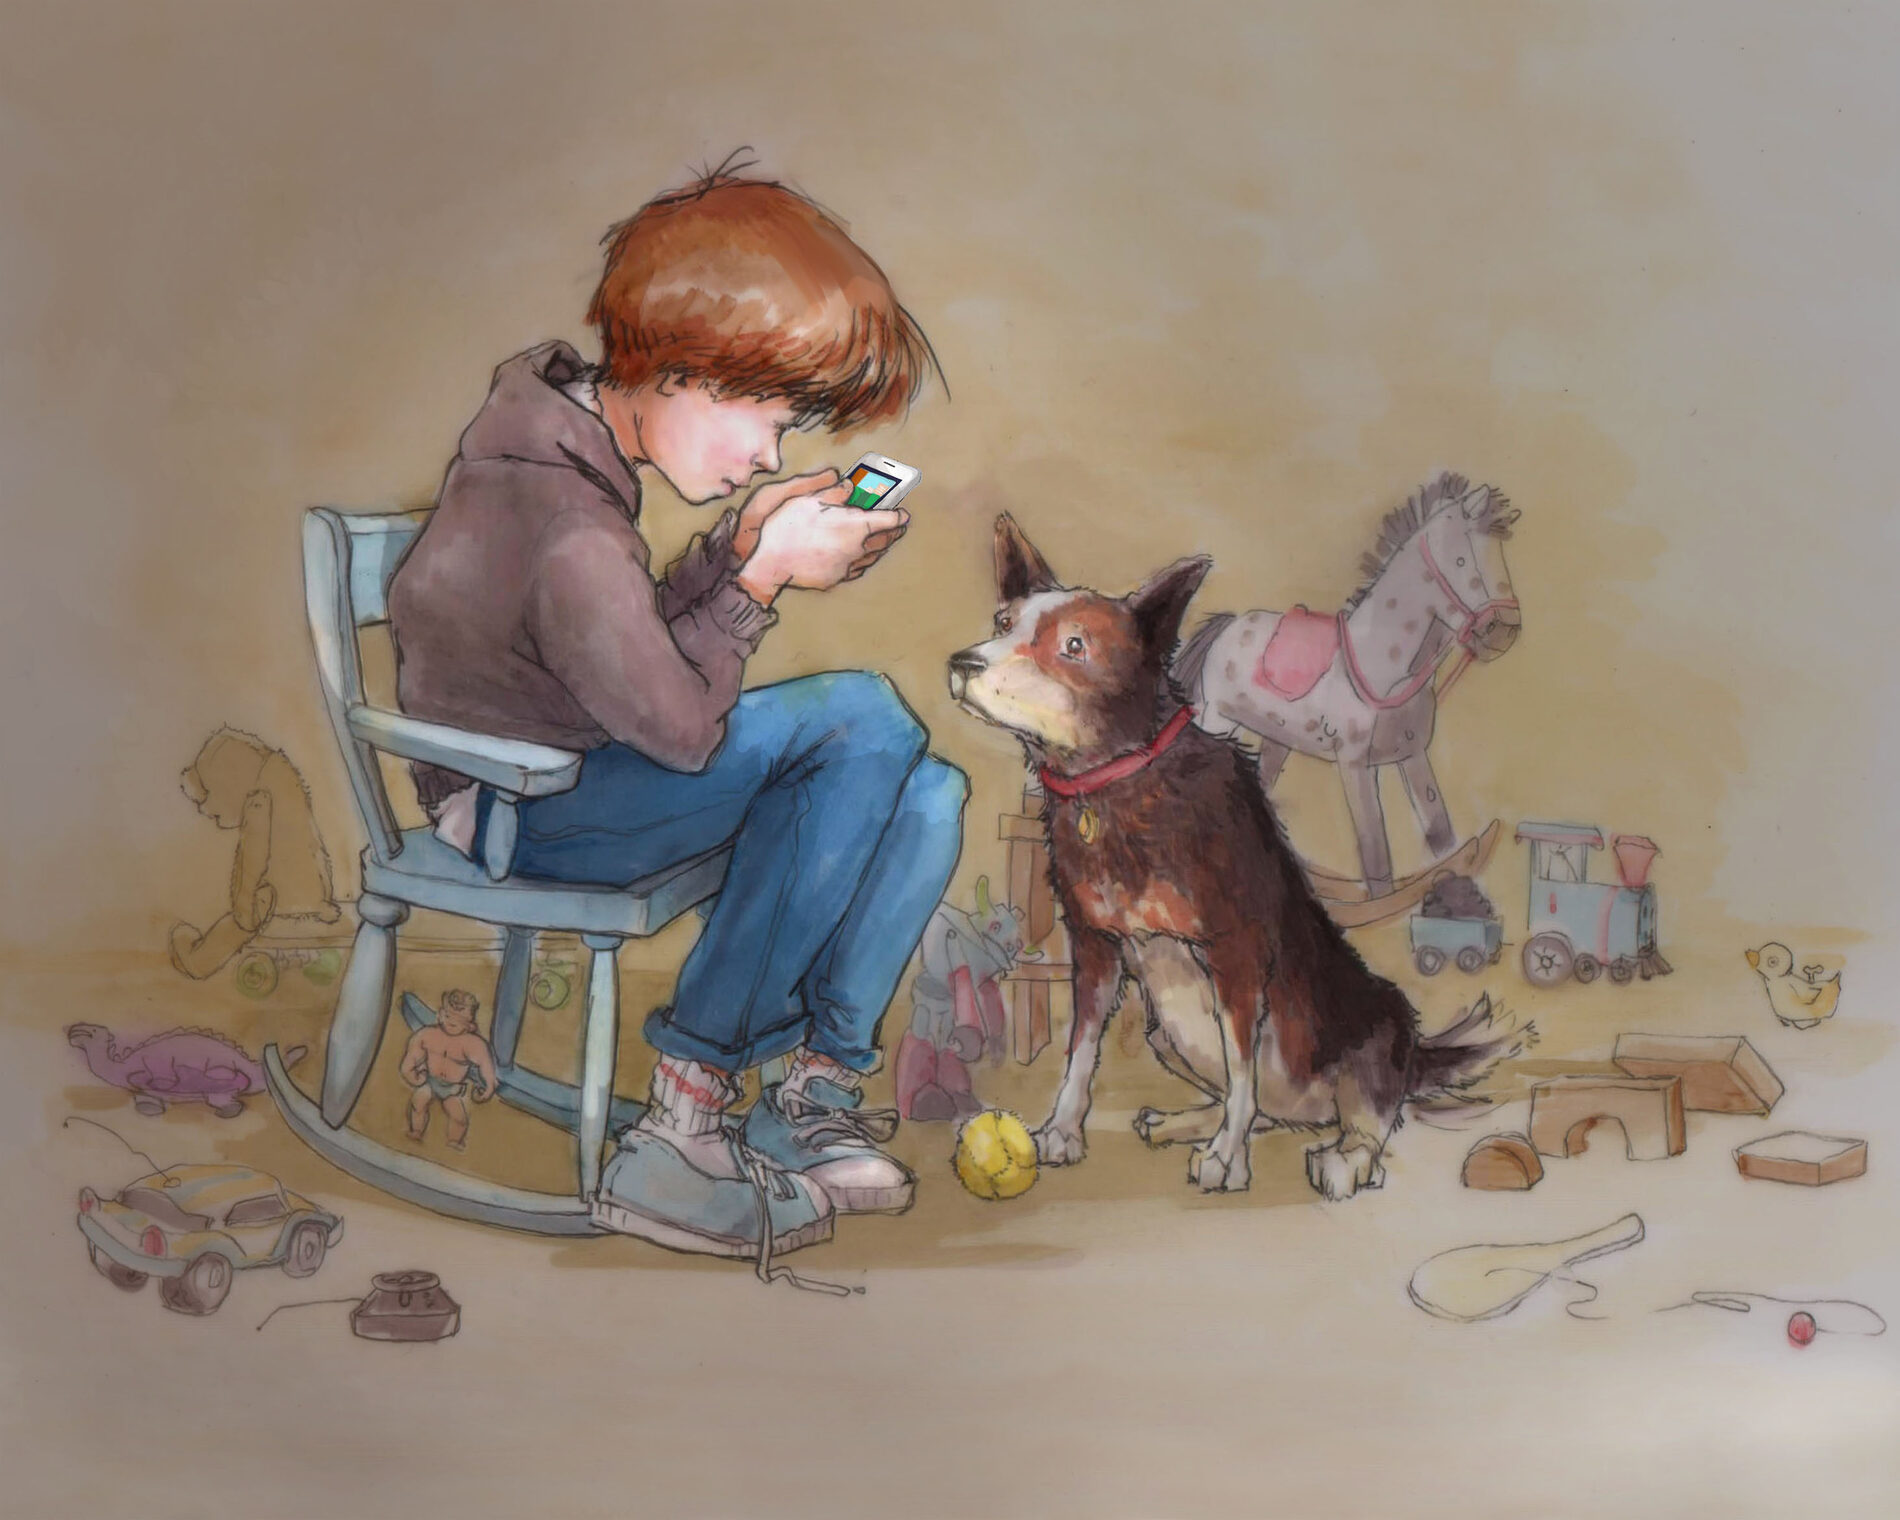 A boy sitting in a rocking chair with toys scattered on the floor, taking a picture with his phone of his dog or playing on the phone in front of his patient dog.